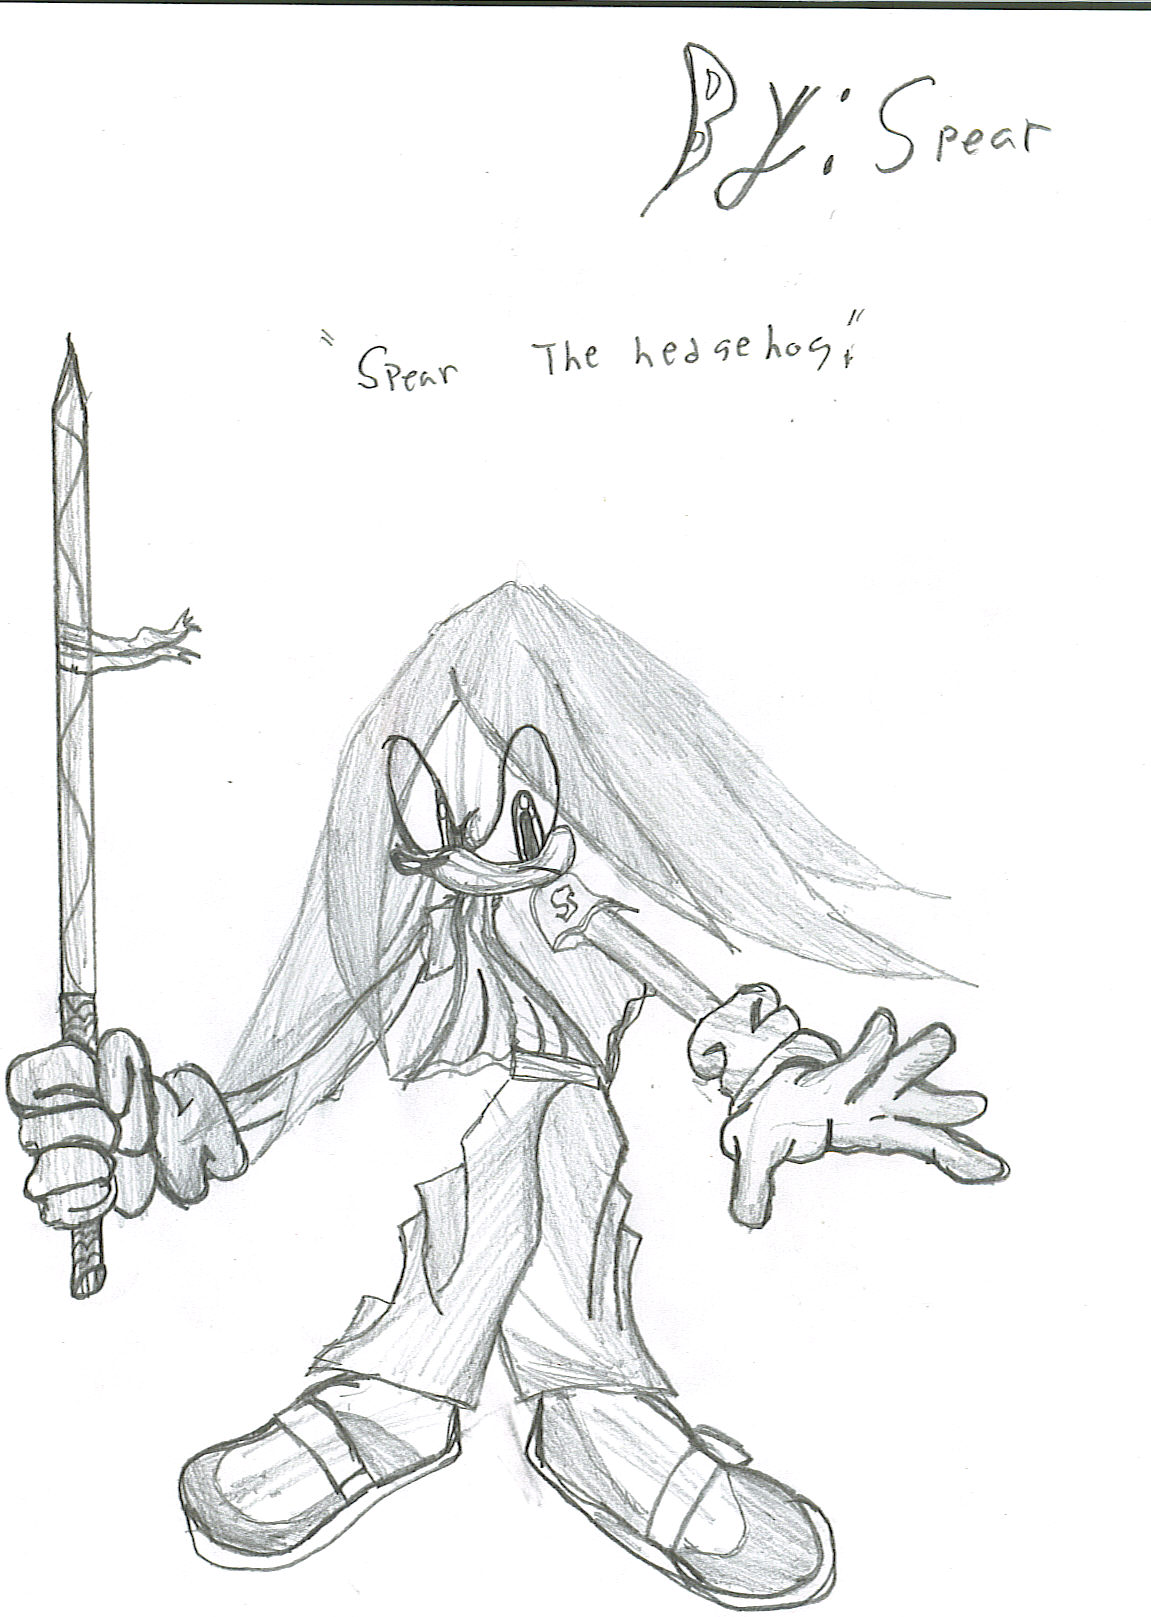 spear the hedgehog by spear